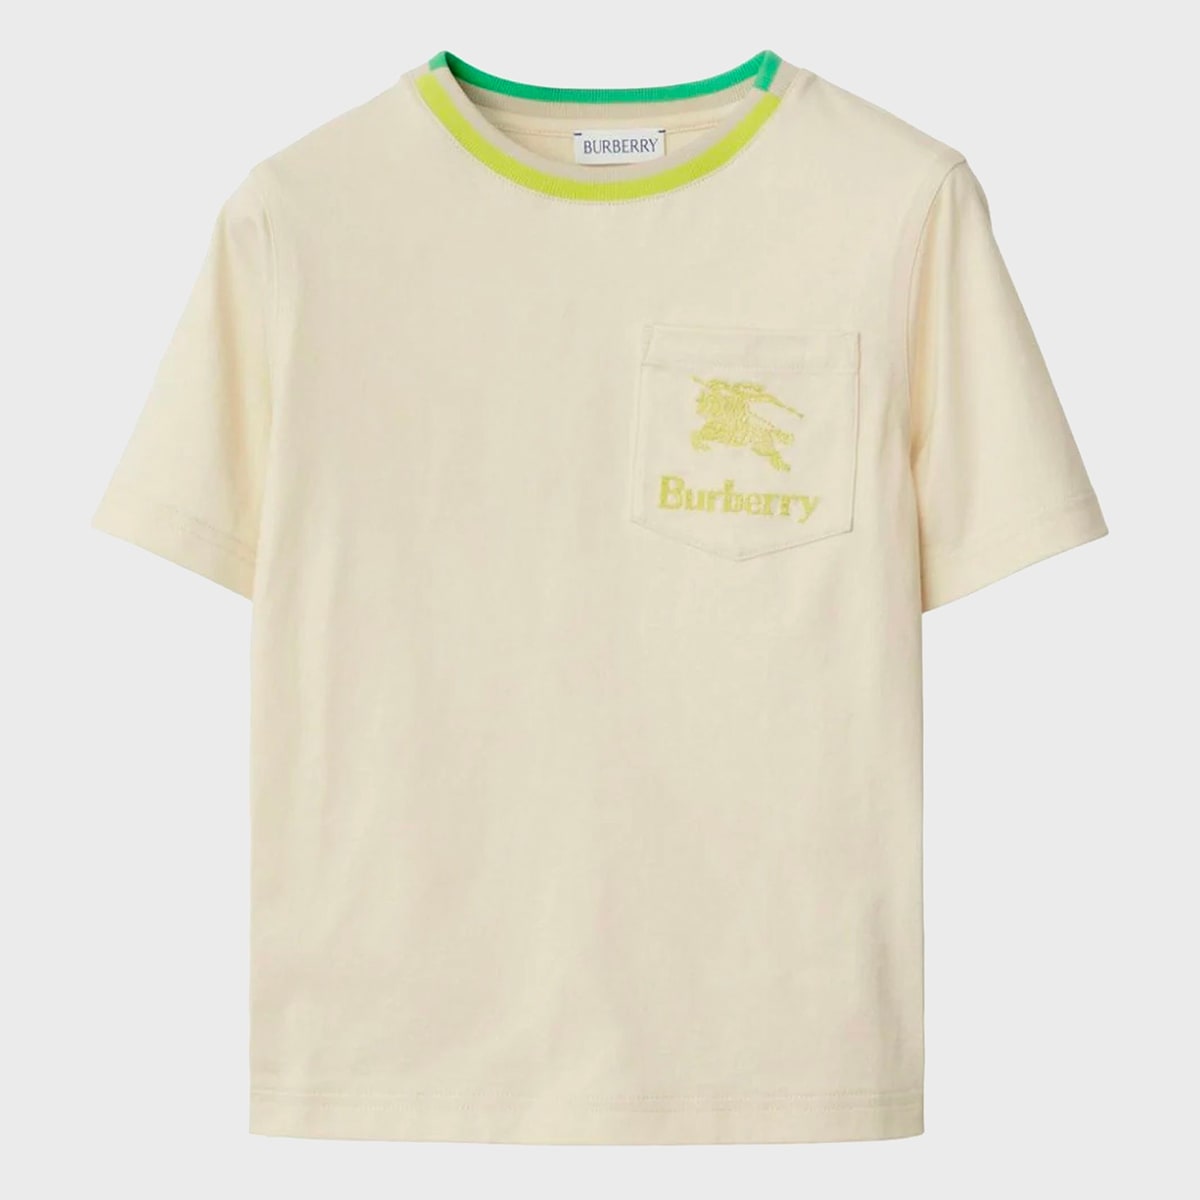 Burberry Babies' Beige Cotton T-shirt In Wheat Us